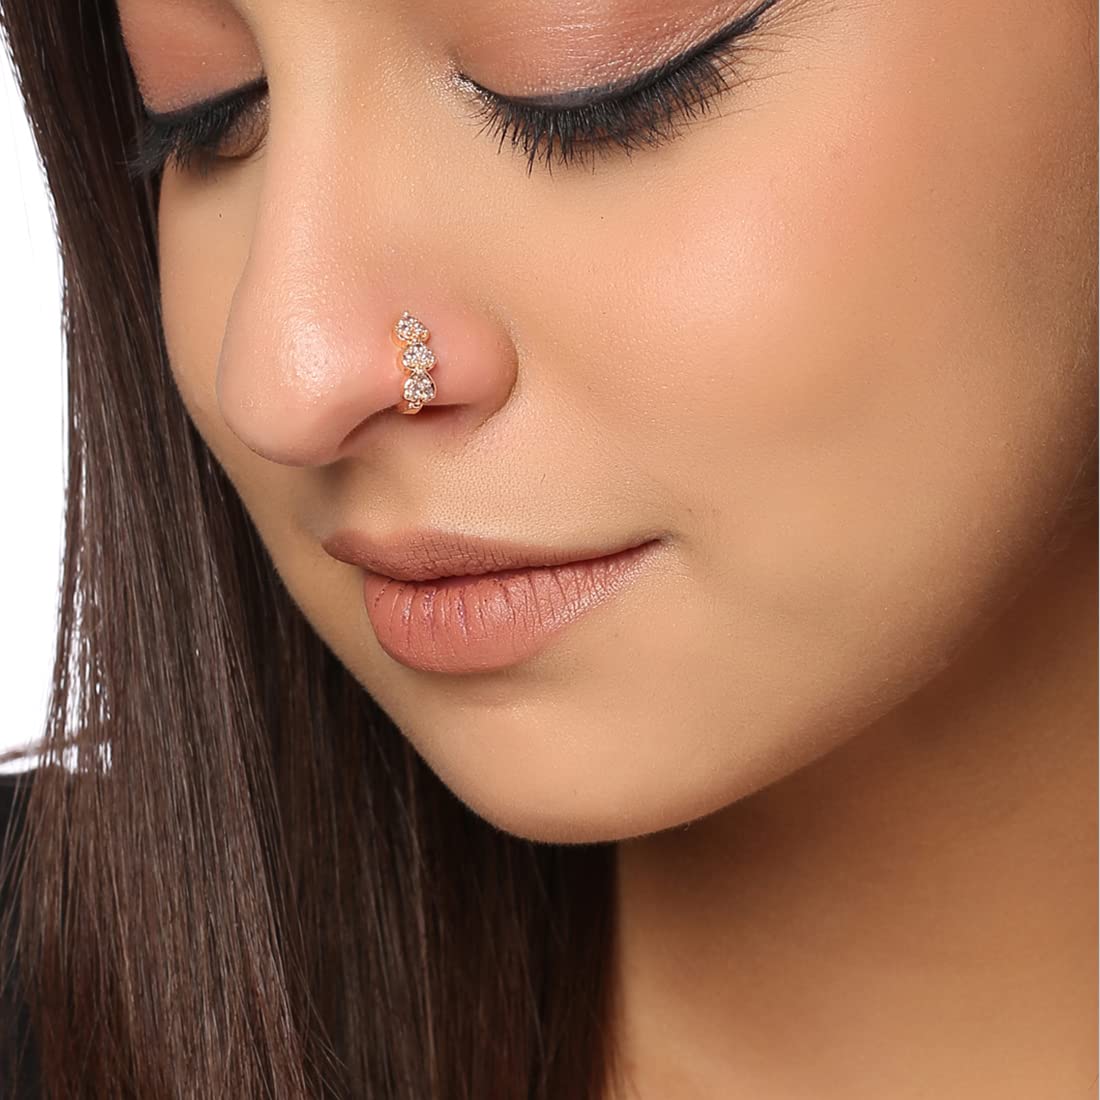 Buy Gold Nose Rings Online | Latest Designs at Best Price - PC Chandra